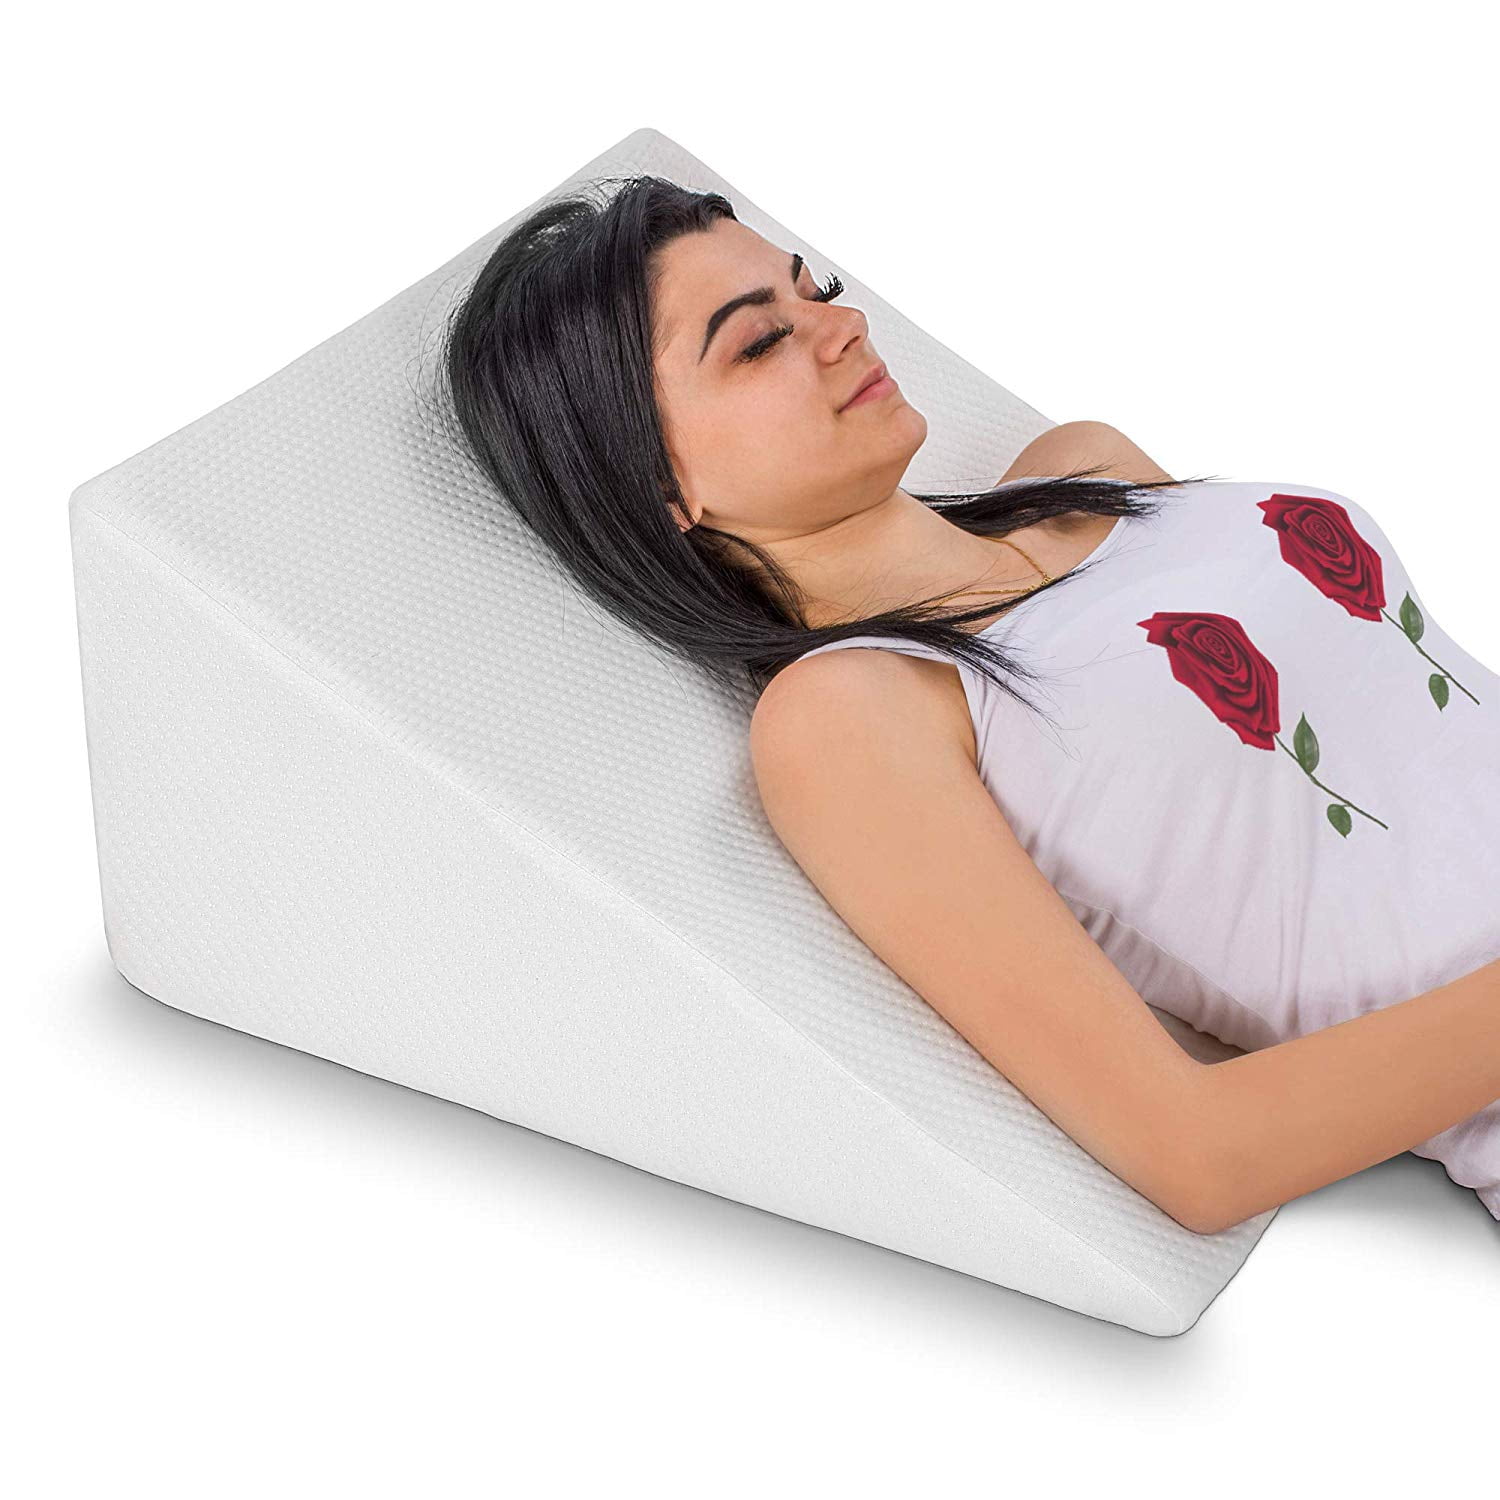 A Wedge Pillow for Hip Pain Can Help You Sleep